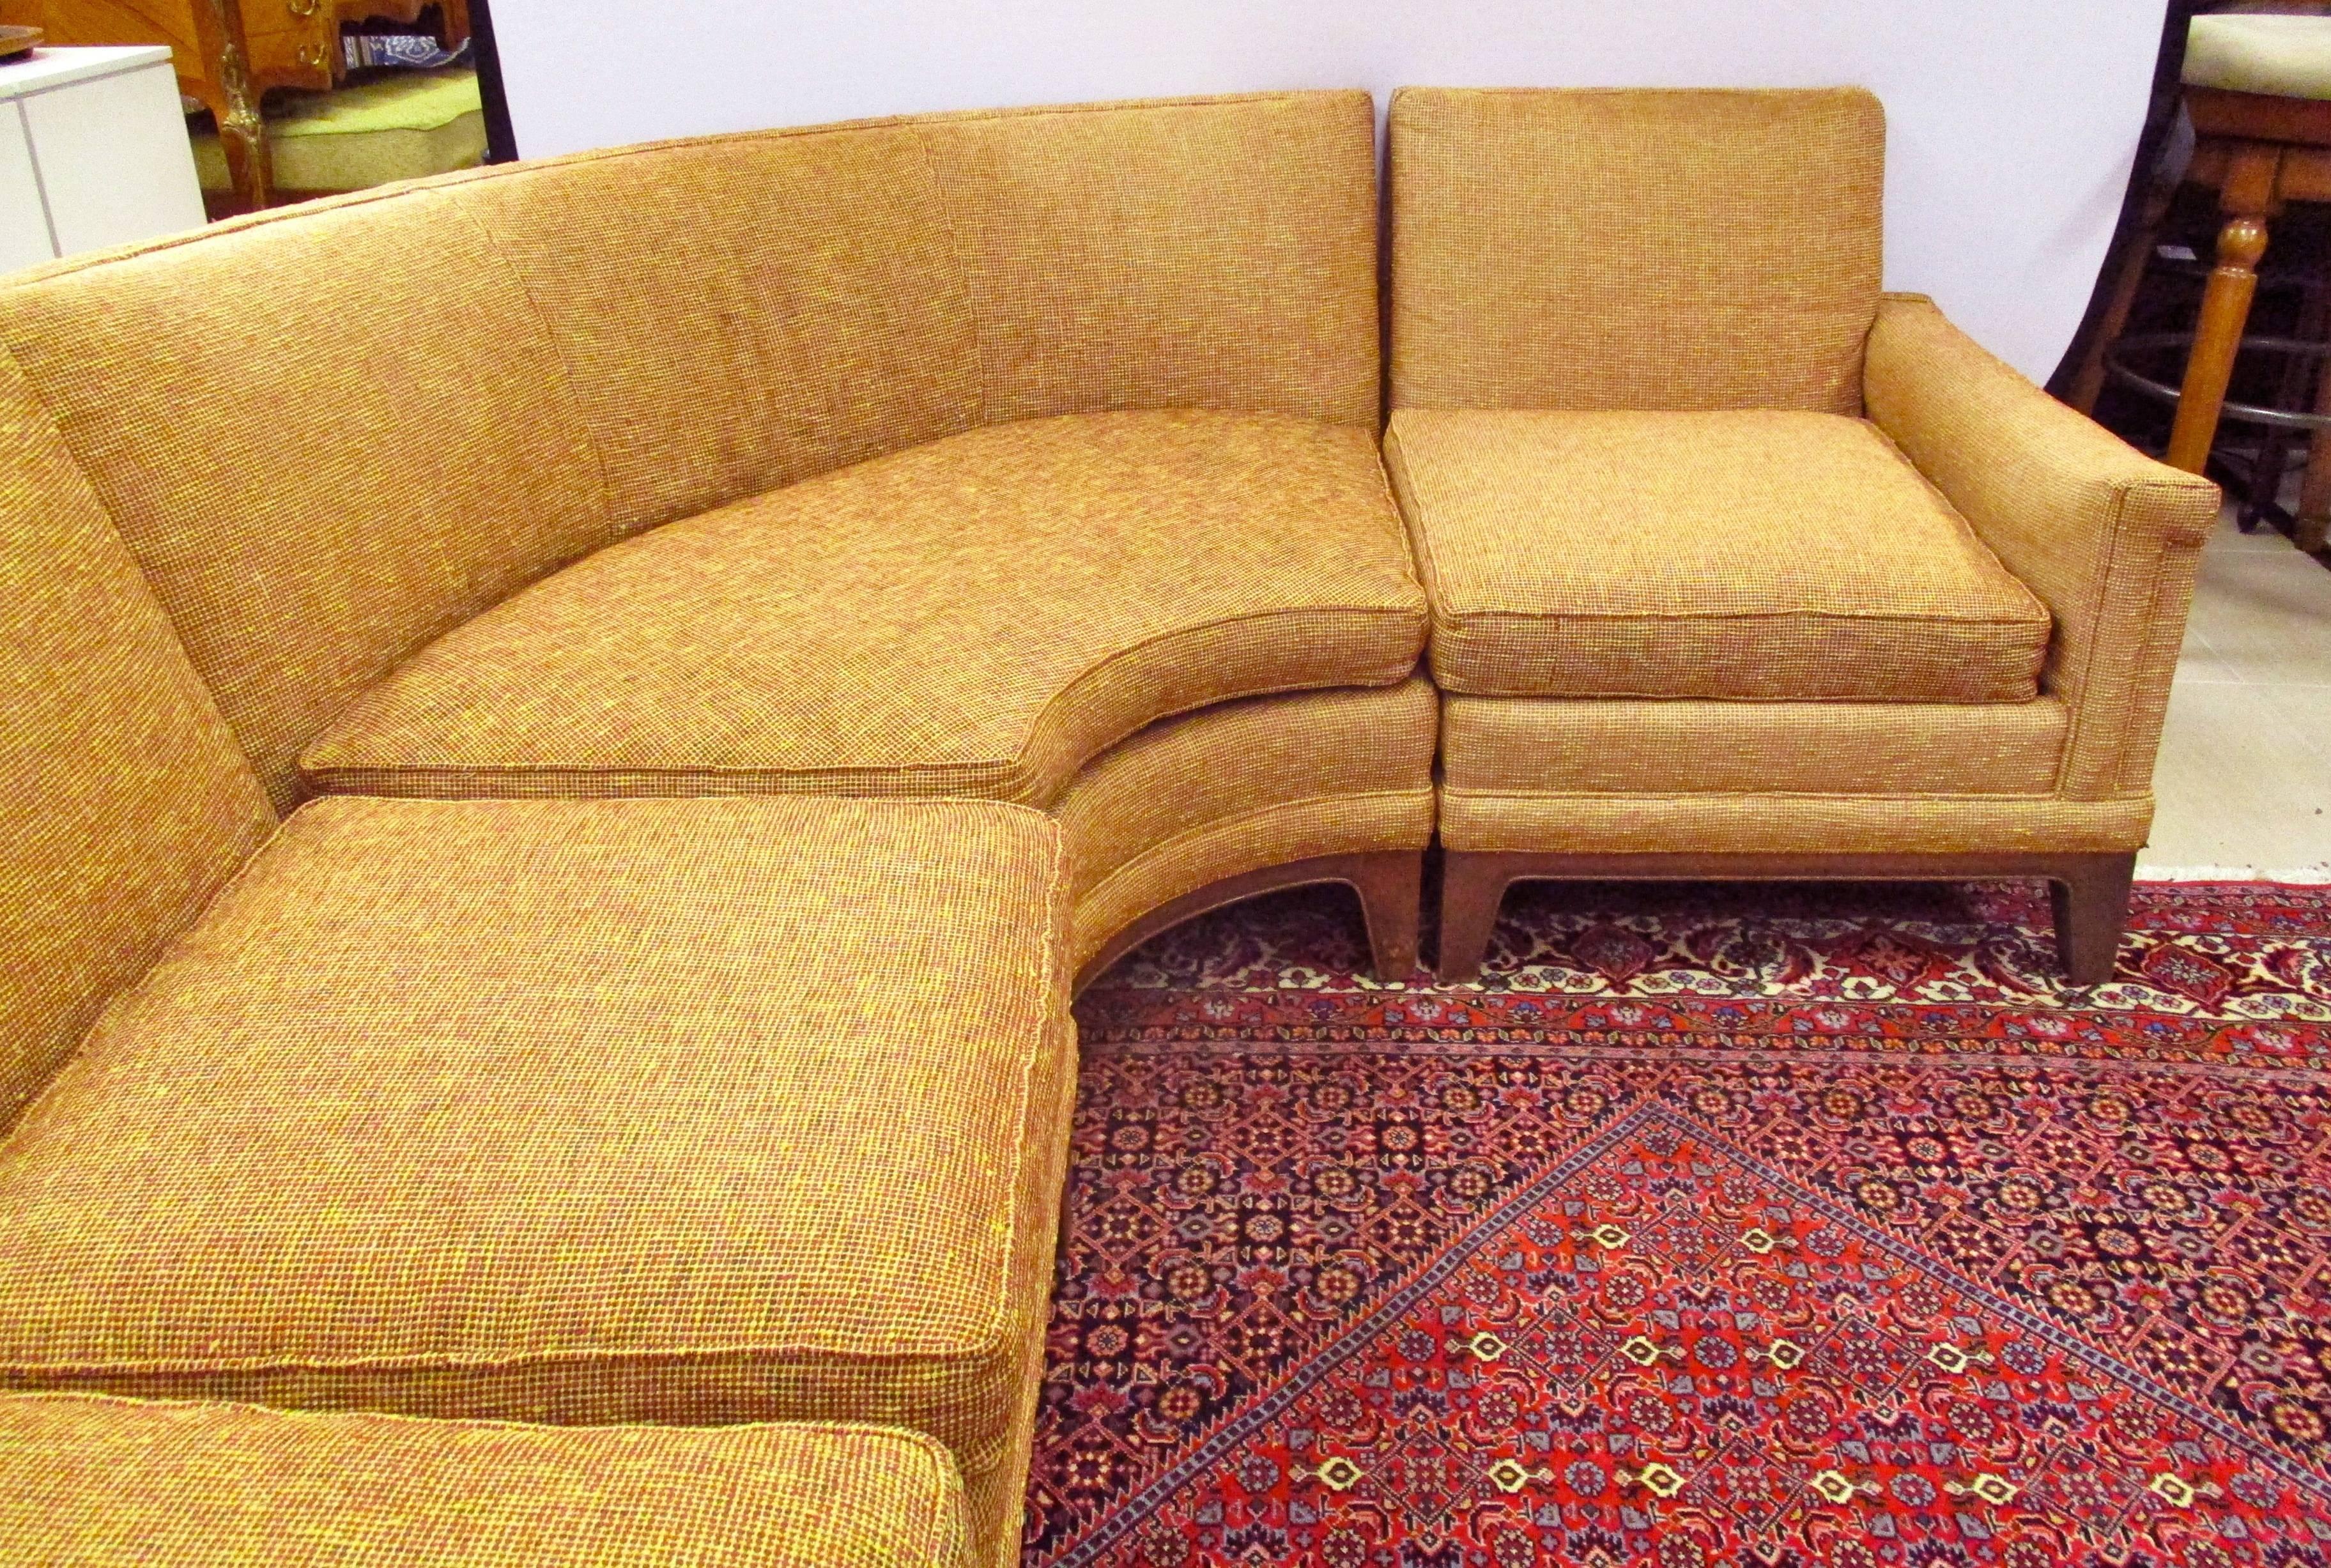 Vintage mid century six-piece sectional sofa with great style and craftsmanship. It consists of two arm (left and right) sections, one curved section and four armless sections.
Curved section 48 inches wide x 48 inches deep x 29 inches high
Three